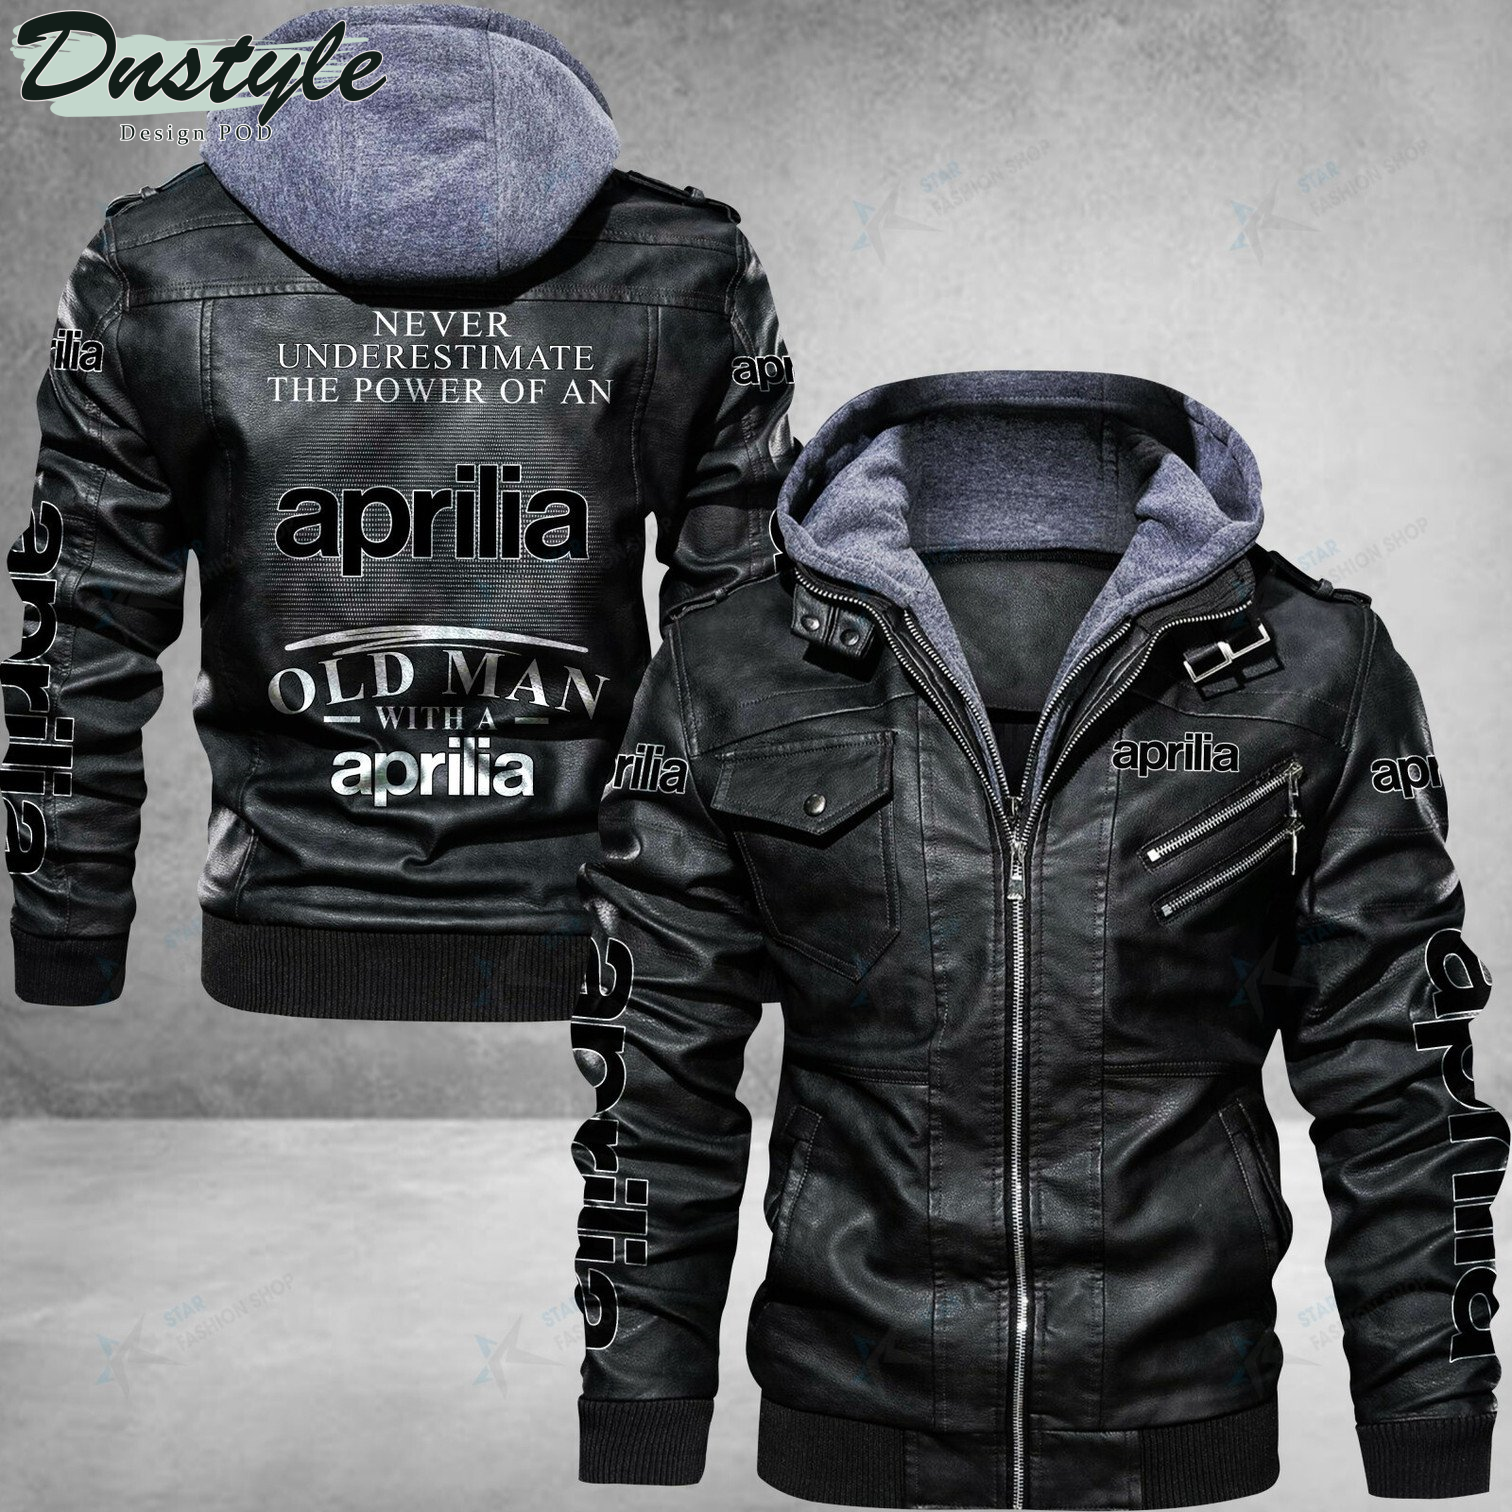 Aprilia never underestimate the power of an old man leather jacket